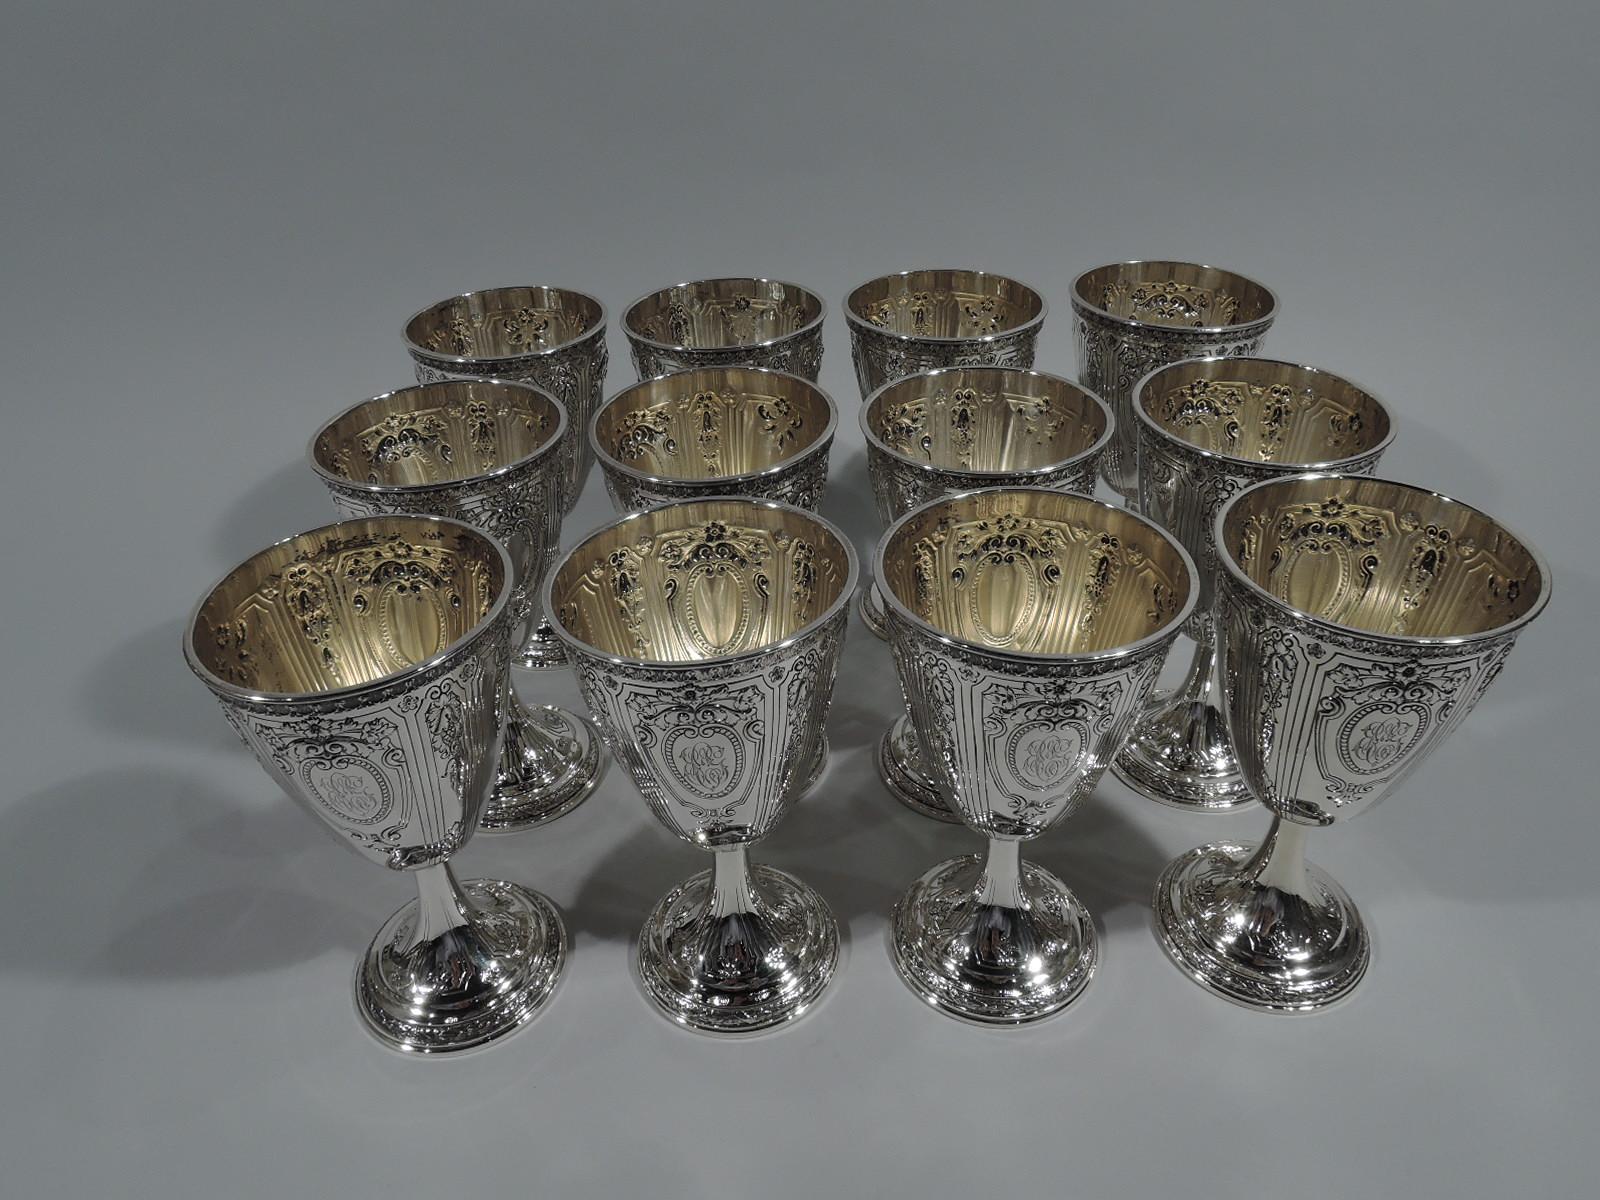 Neoclassical Revival Set of 12 Antique Gorham Sterling Silver Goblets in Maintenon Pattern